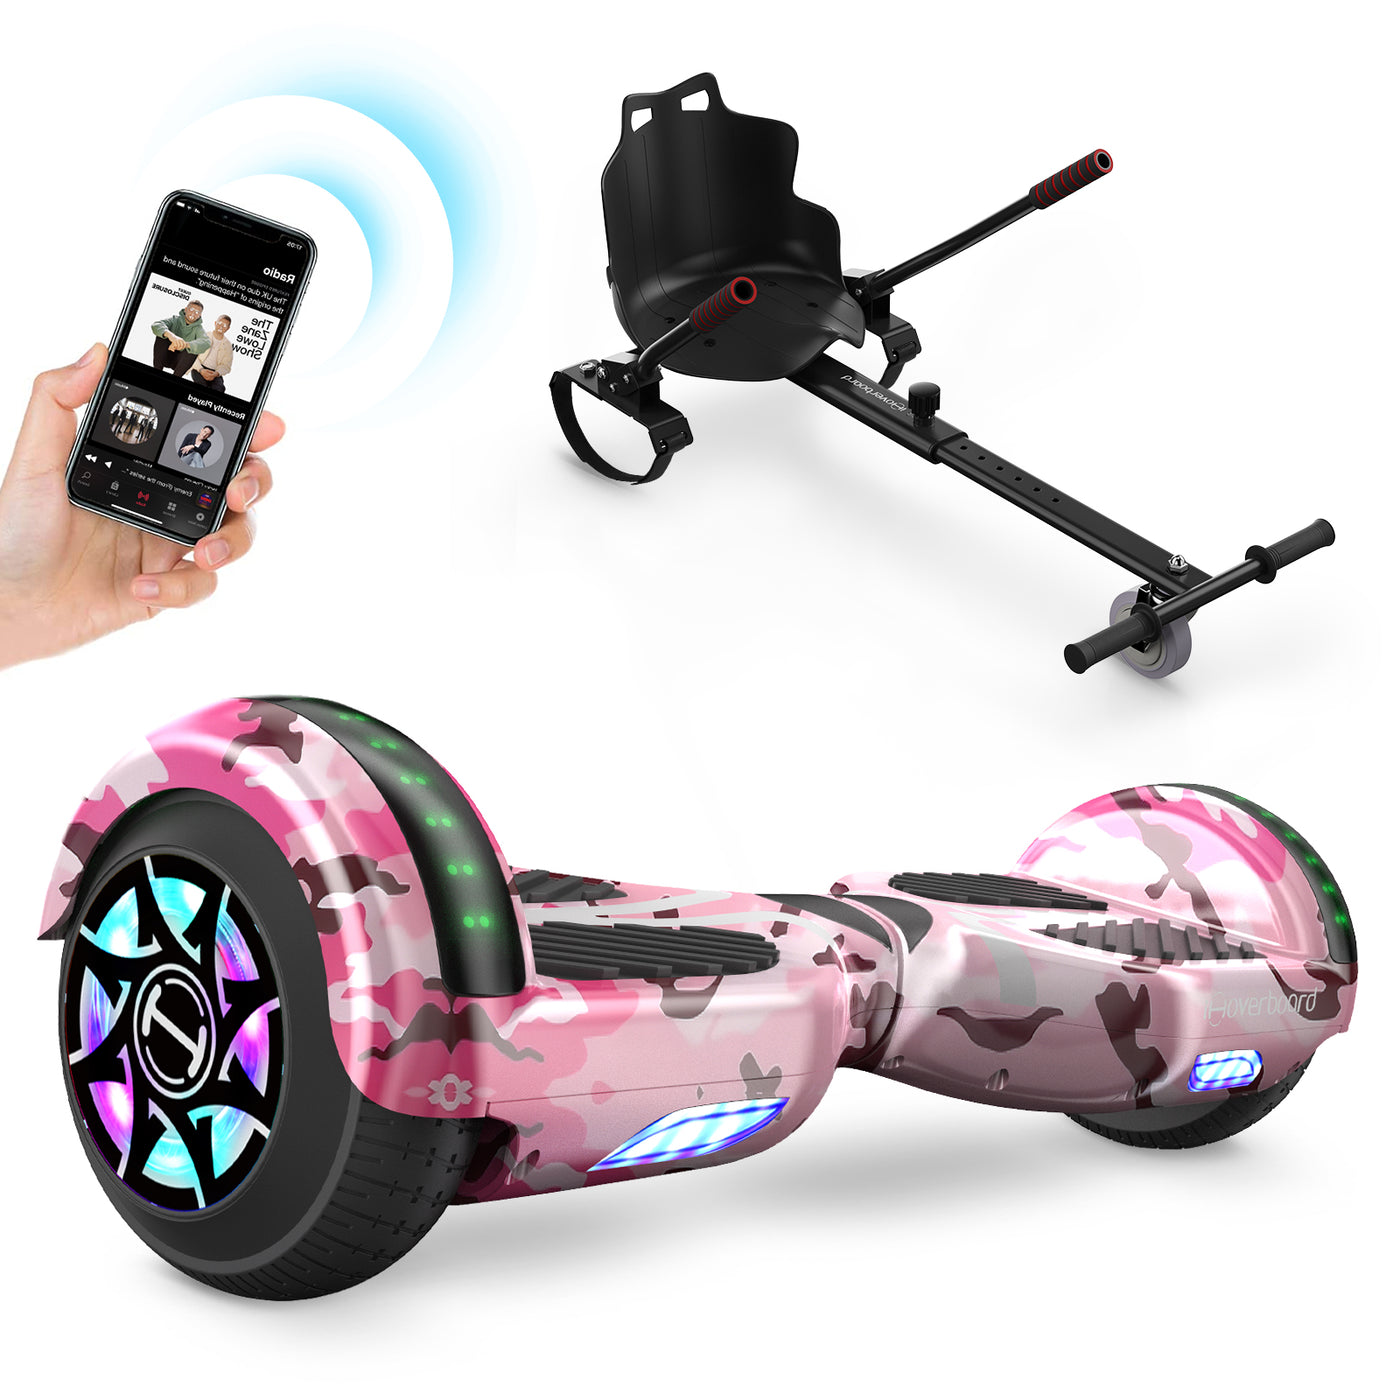 ihoverboard pink h4 Can be connected to Bluetooth